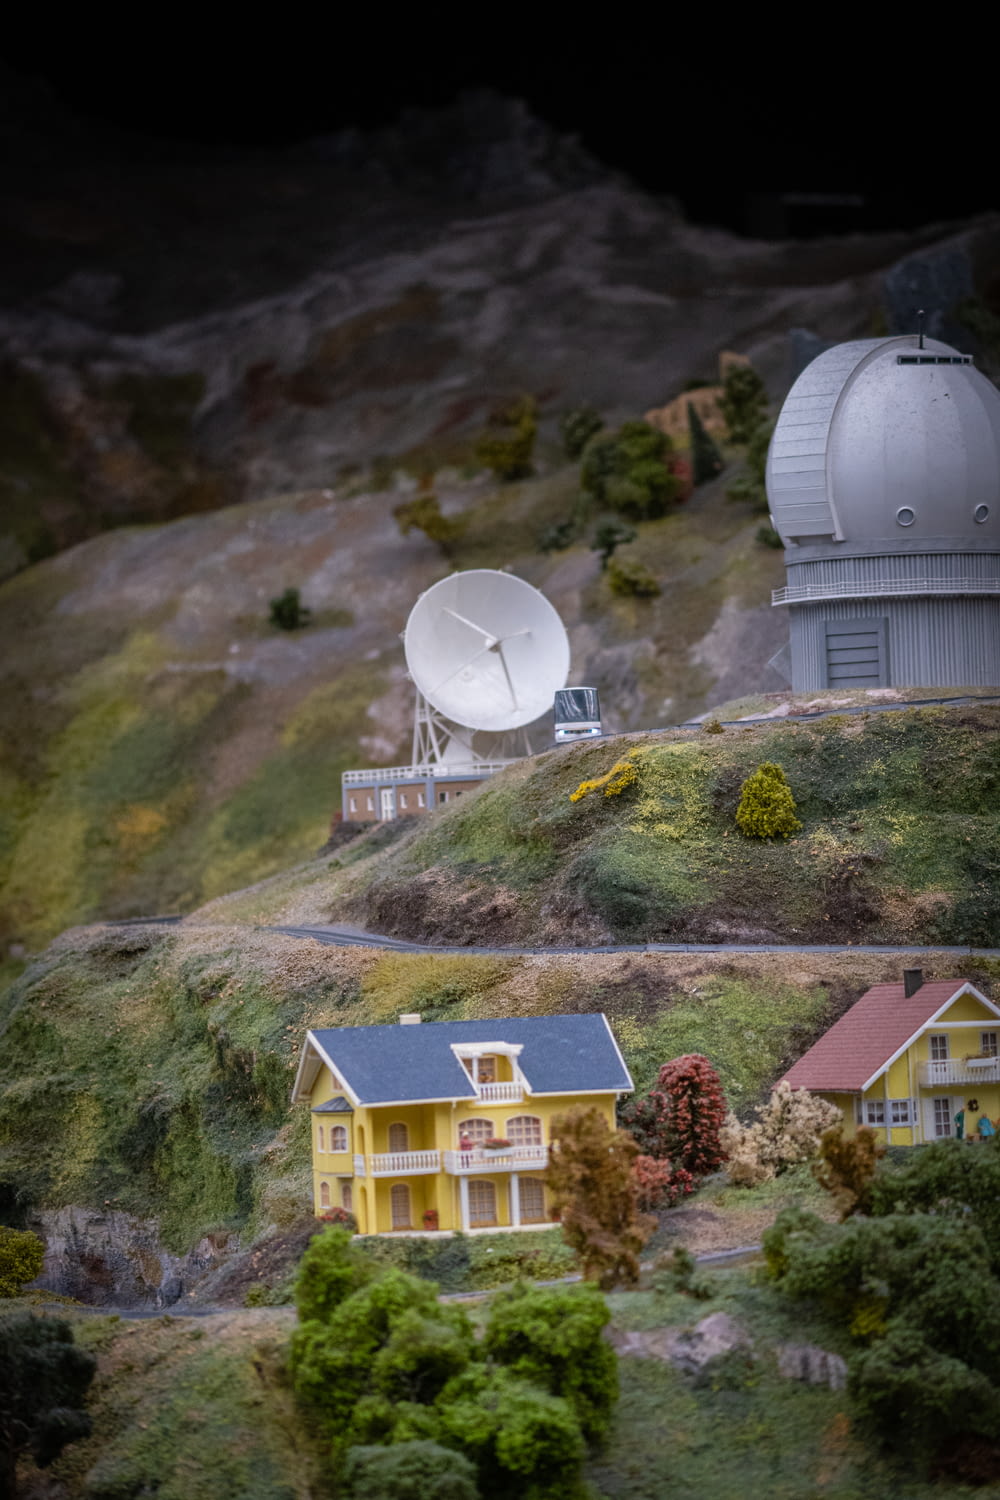 a model of a house with a satellite dish on top of it